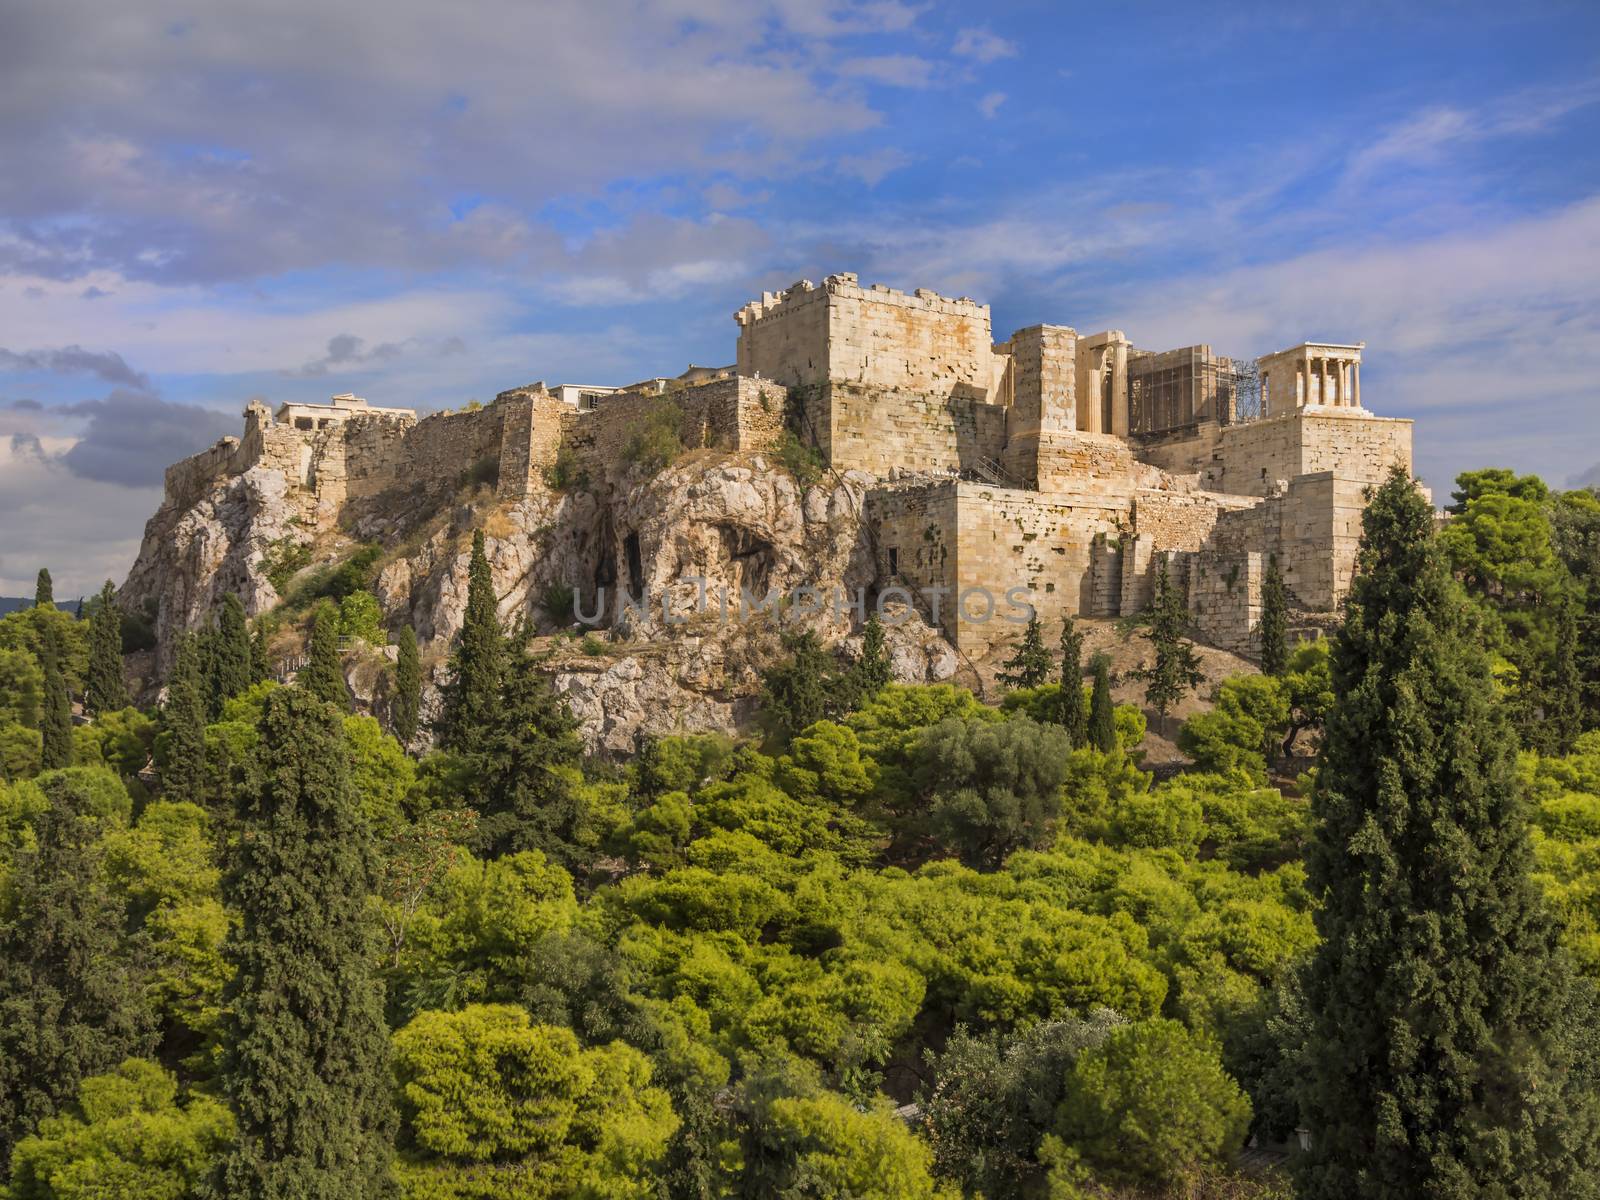 Acropolis of Athens by f/2sumicron